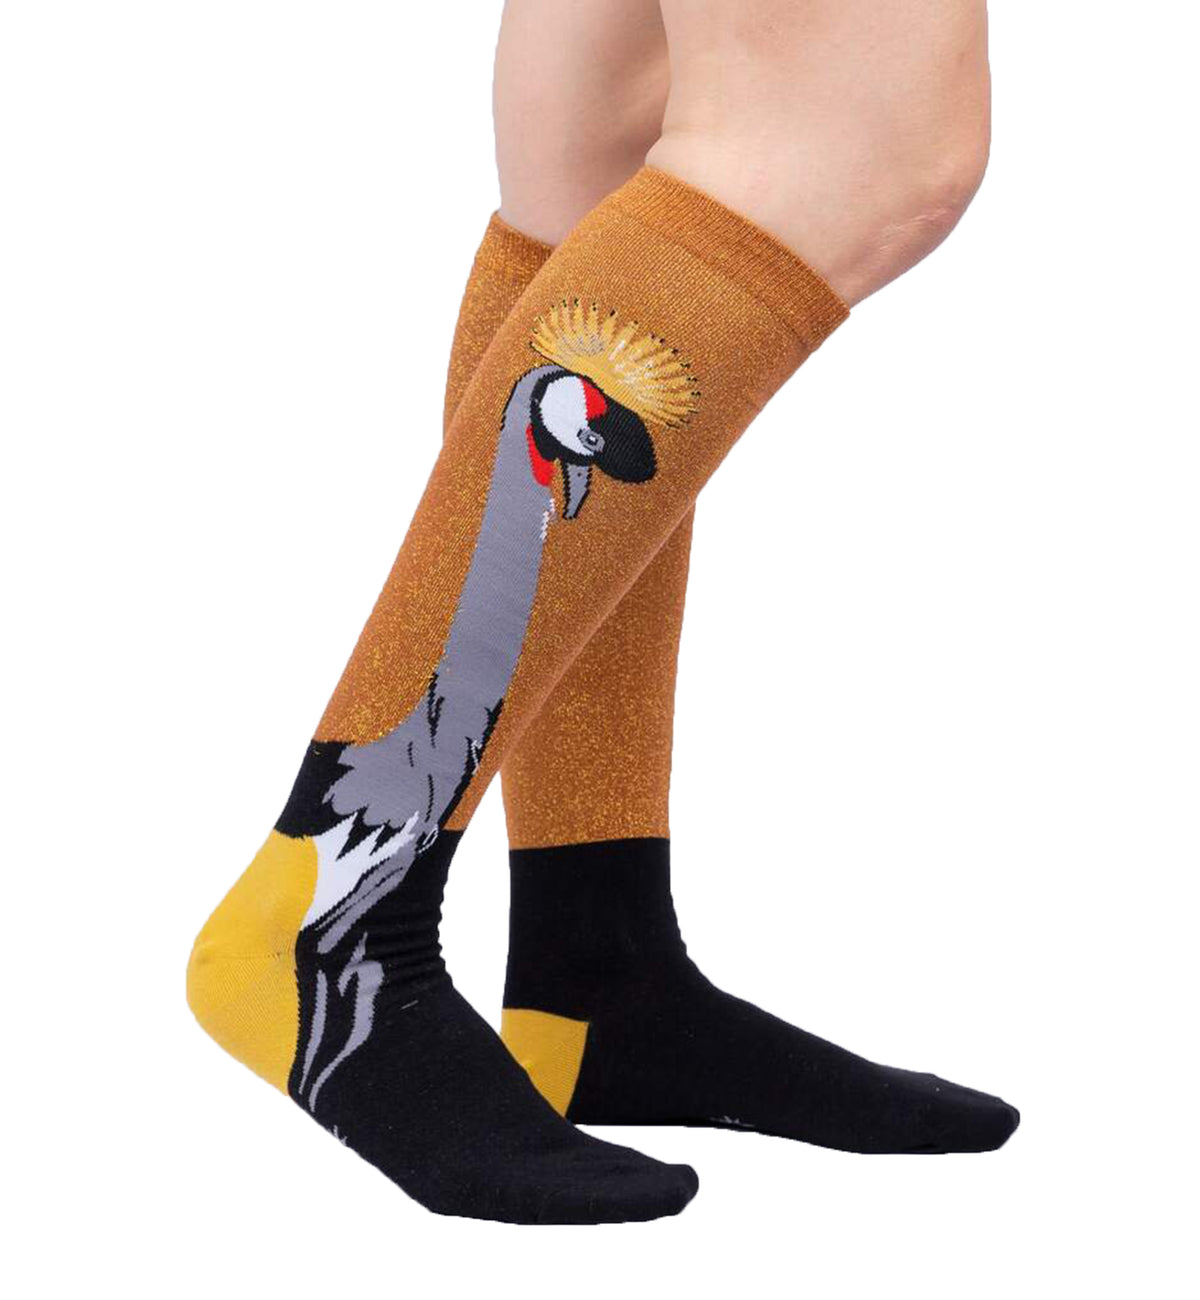 SOCK it to me Unisex Knee High Socks (F0623),Crowned Crane - Crowned Crane,One Size